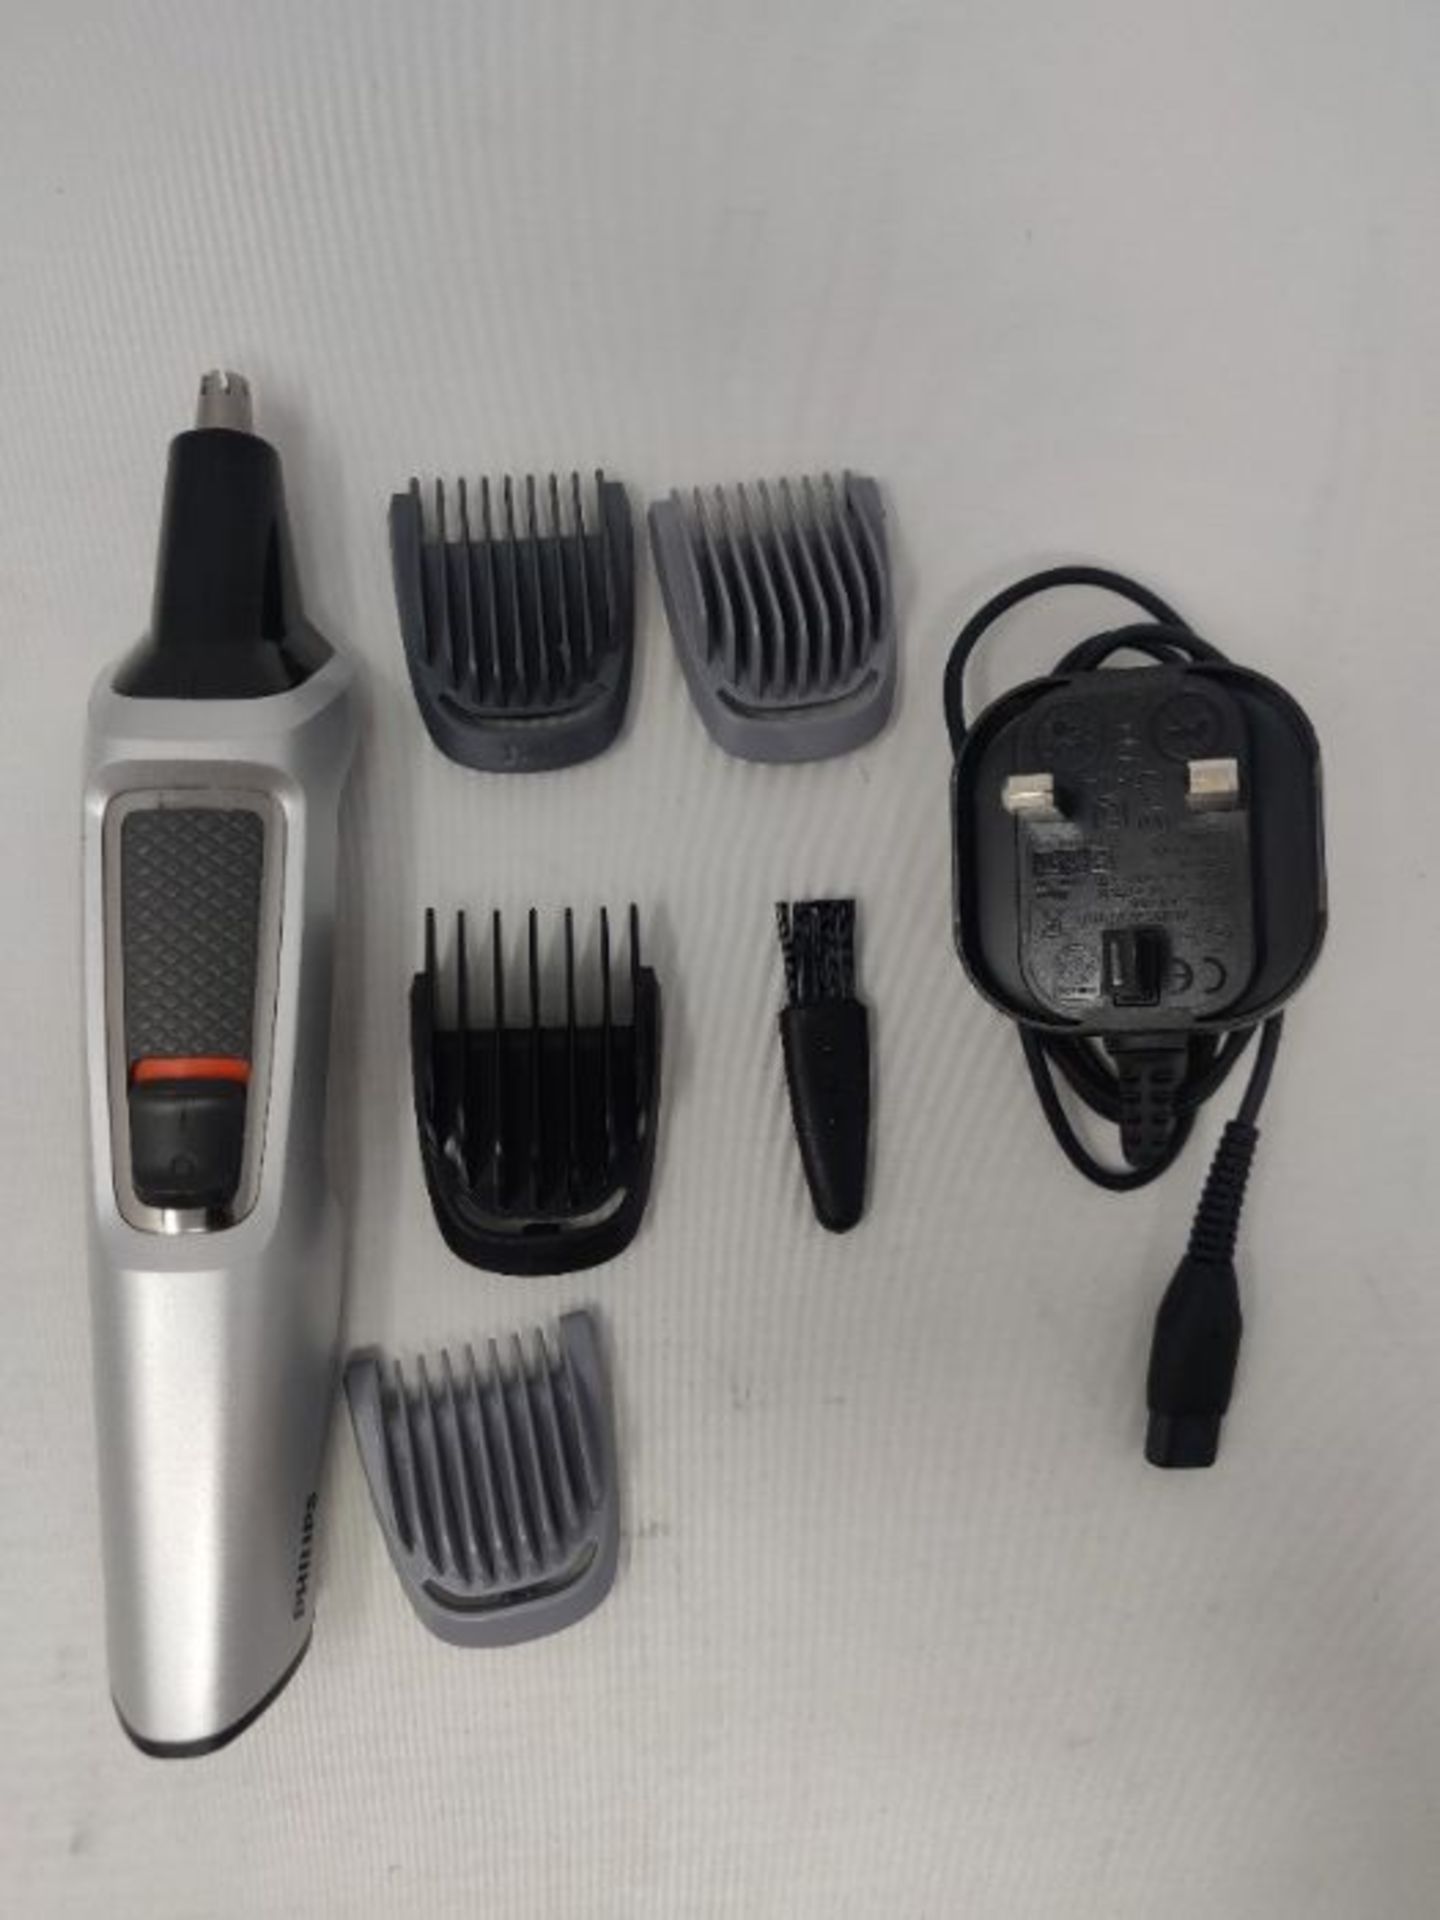 Philips 9-in-1 All-In-One Trimmer, Series 3000 Grooming Kit for Beard & Hair with 9 At - Image 2 of 2